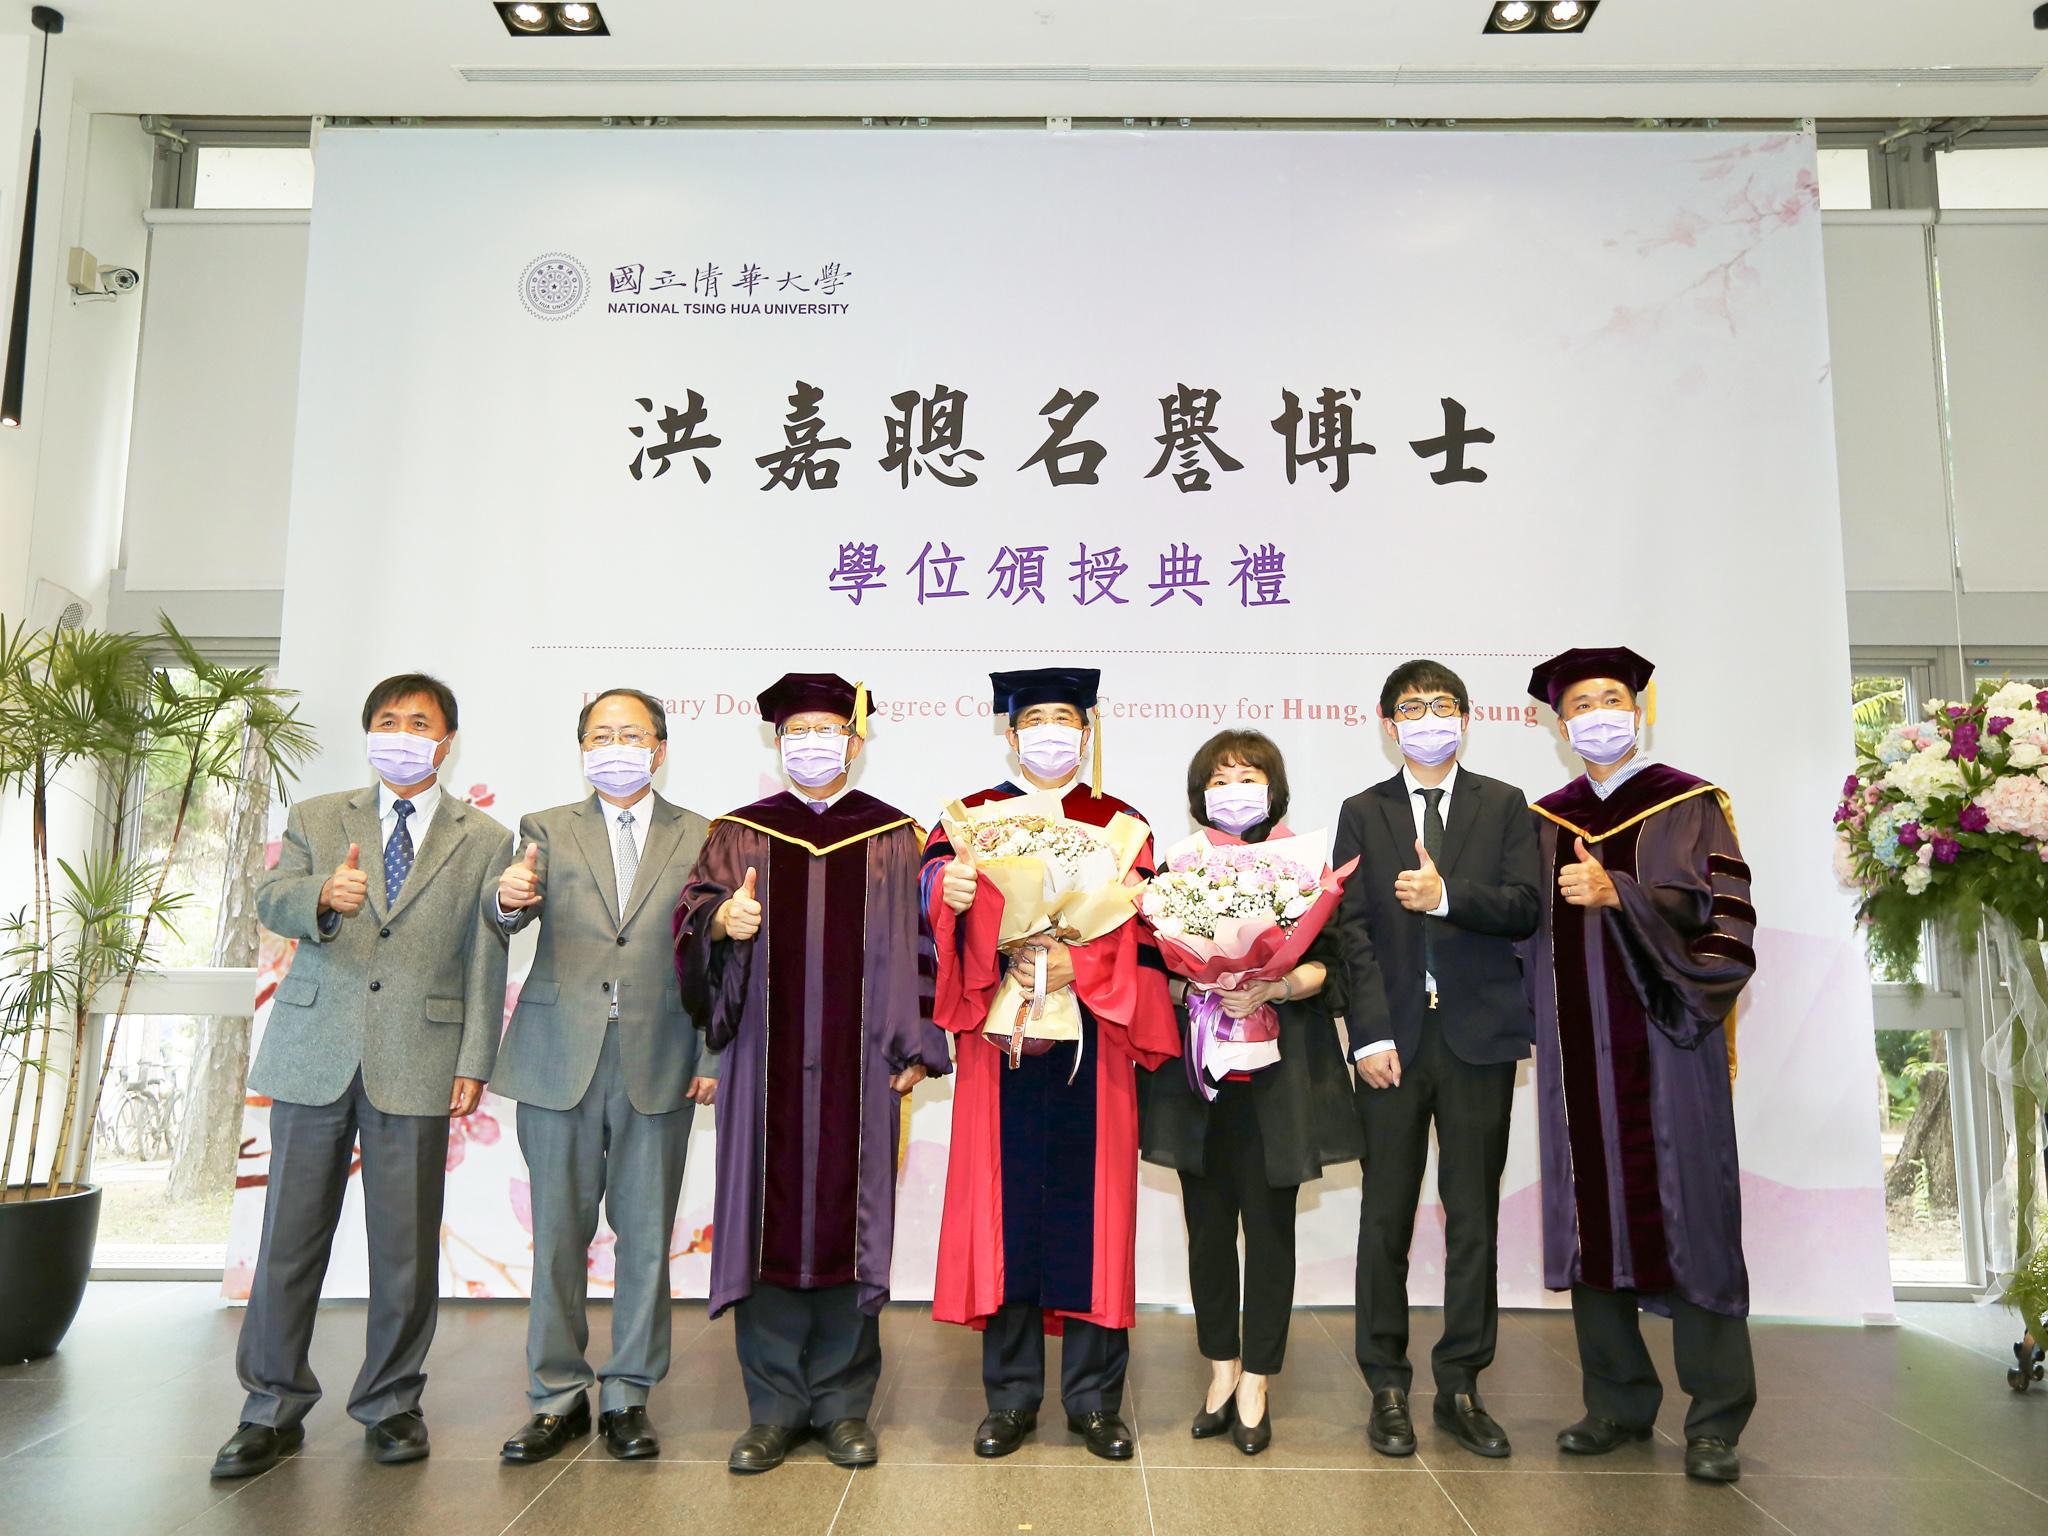 At the conferral ceremony (left to right): former minister of Science and Technology Hsu Chueh-min (徐爵民); Chen Lih-juann(陳力俊), chancellor of the University System of Taiwan; NTHU president Hocheng Hong;  Hung Chia-tsung(洪嘉聰); Mrs. Hung Chia-tsung(洪嘉聰夫人); Hung Chia-tsung’s son(洪嘉聰公子); and Fred Huang(黃能富), dean of the College of Electrical Engineering and Computer Science. 